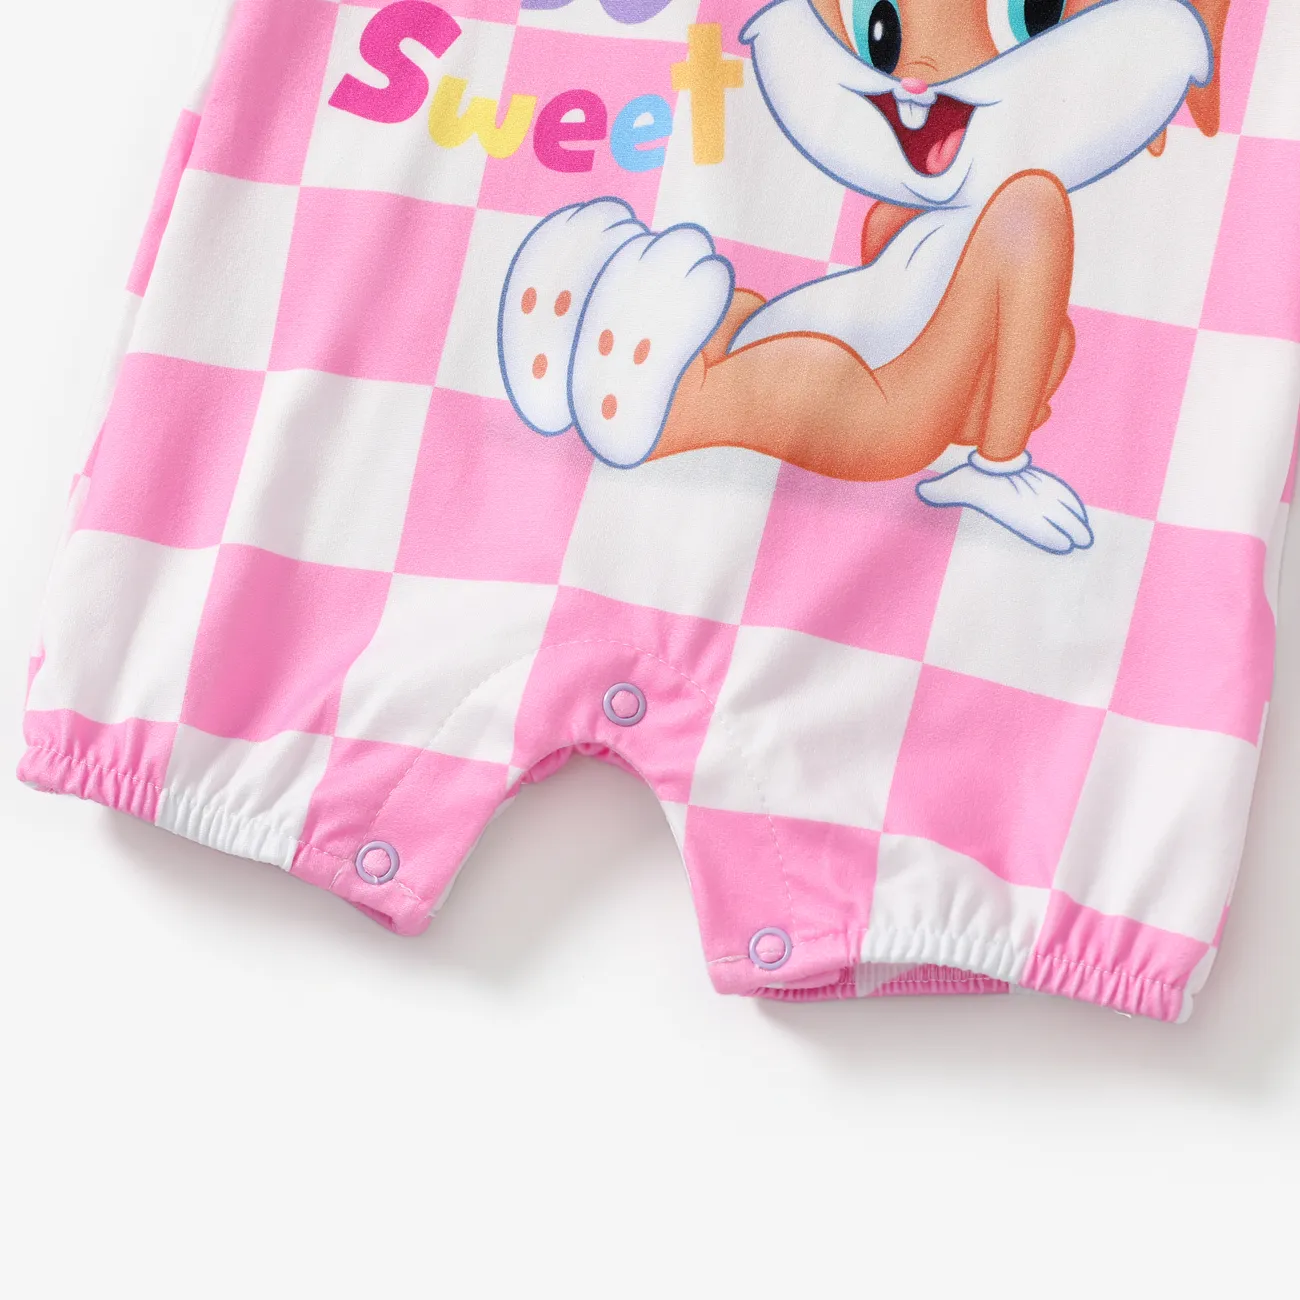 Looney Tunes Baby Boys/Girls 1pc Grid/Houndstooth Character Print Sleeveless Romper
 Pink big image 1